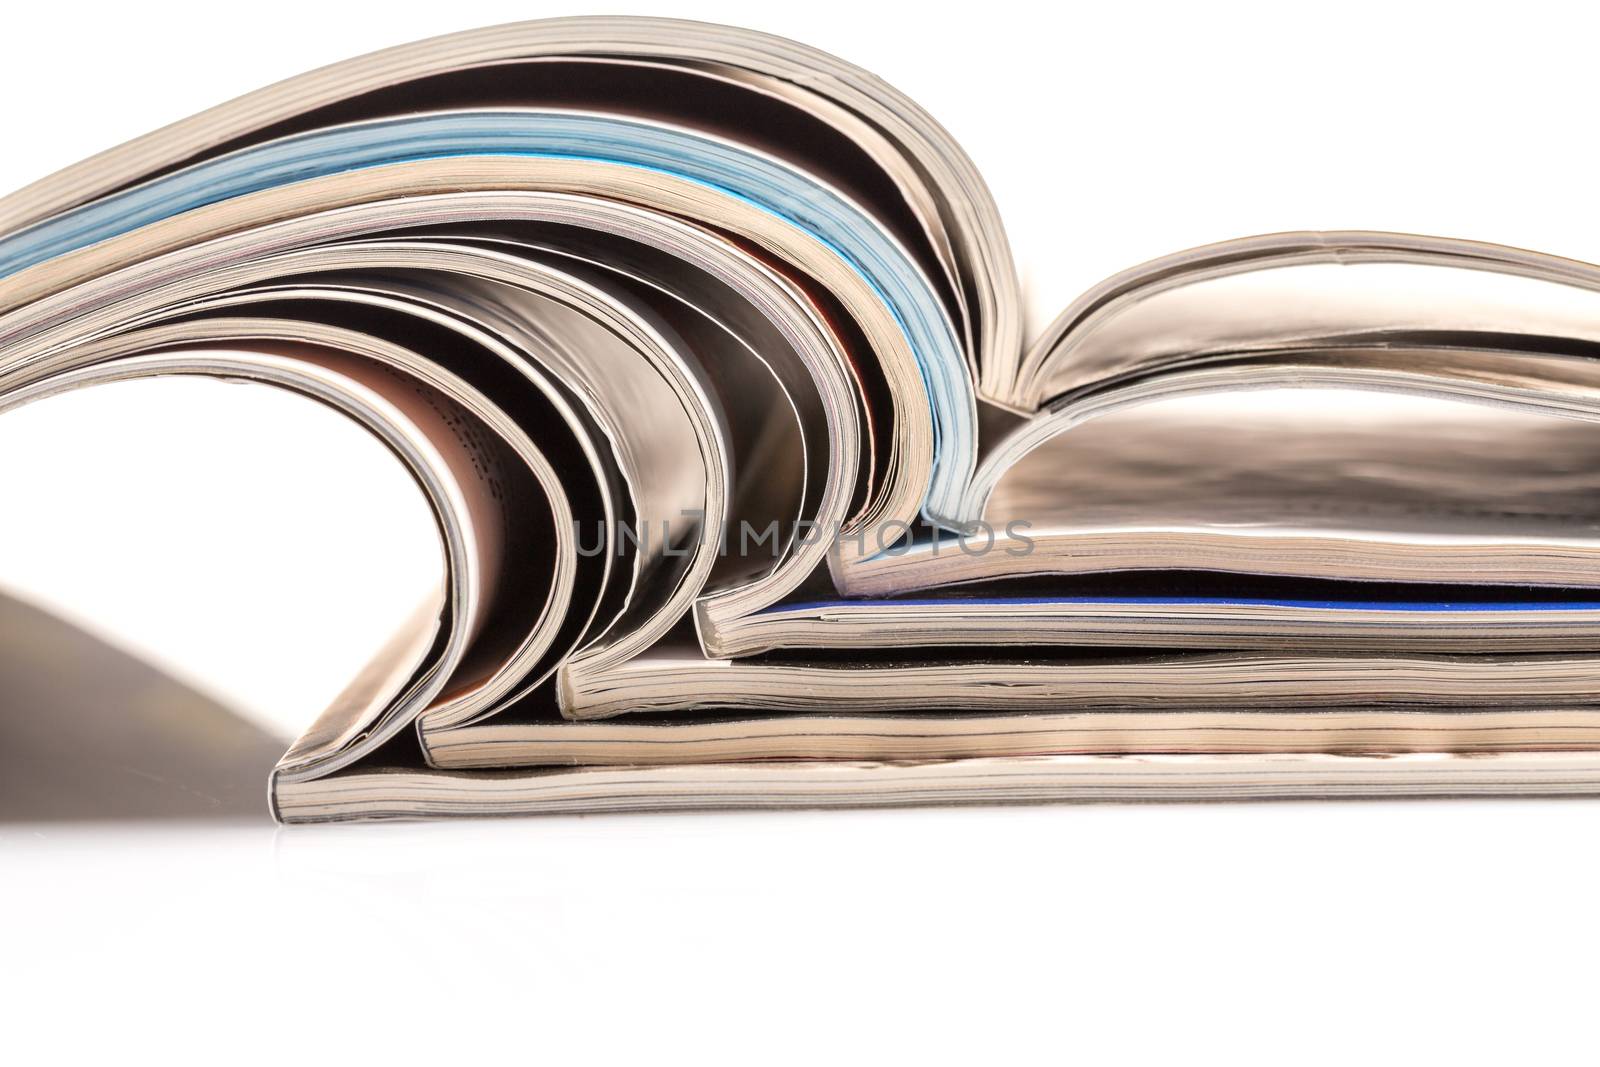 Stack of magazines on white background by RTsubin